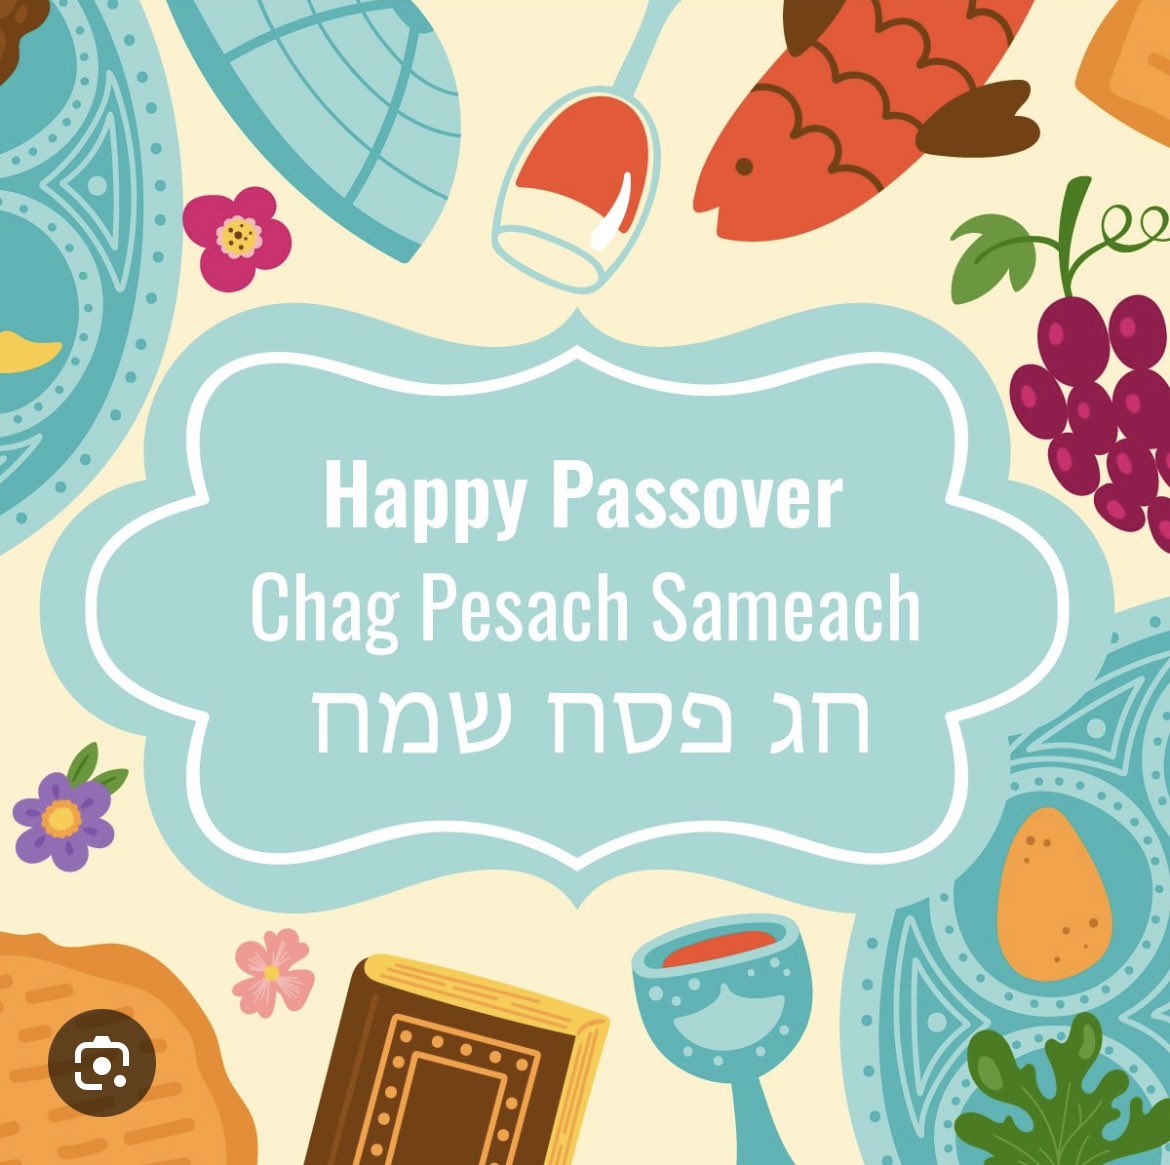 Wishing Jewish communities across Greater Manchester and the surrounding regions a #chagpesachsameach. Thinking of all the families with loved ones murdered on October 7th along with those still held hostage. There will tragically be many empty seats at Seder tables this year.